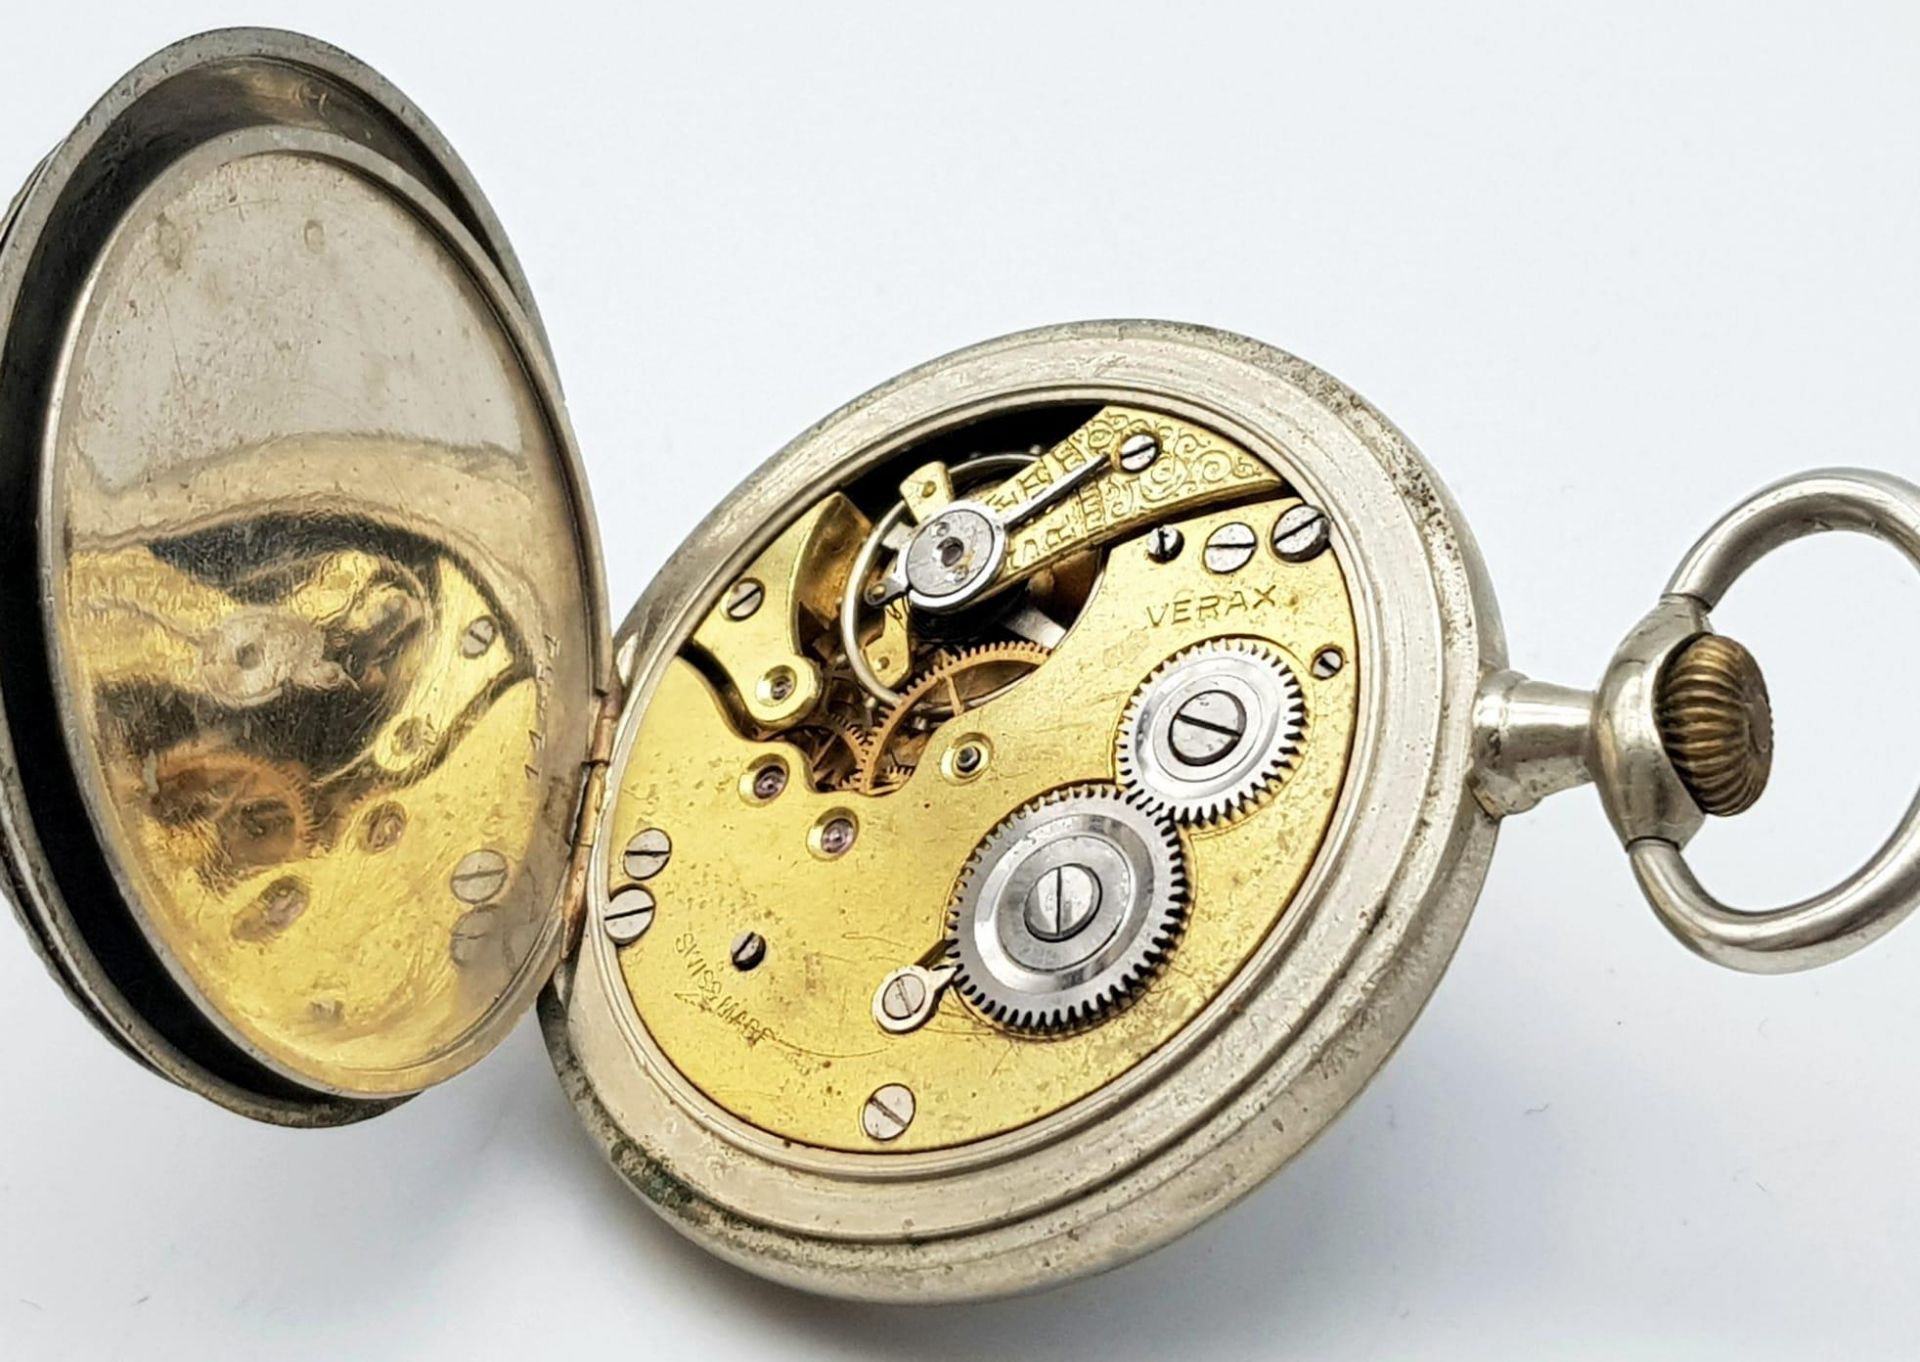 3rd Reich NSPAP pocket watch - Image 5 of 6